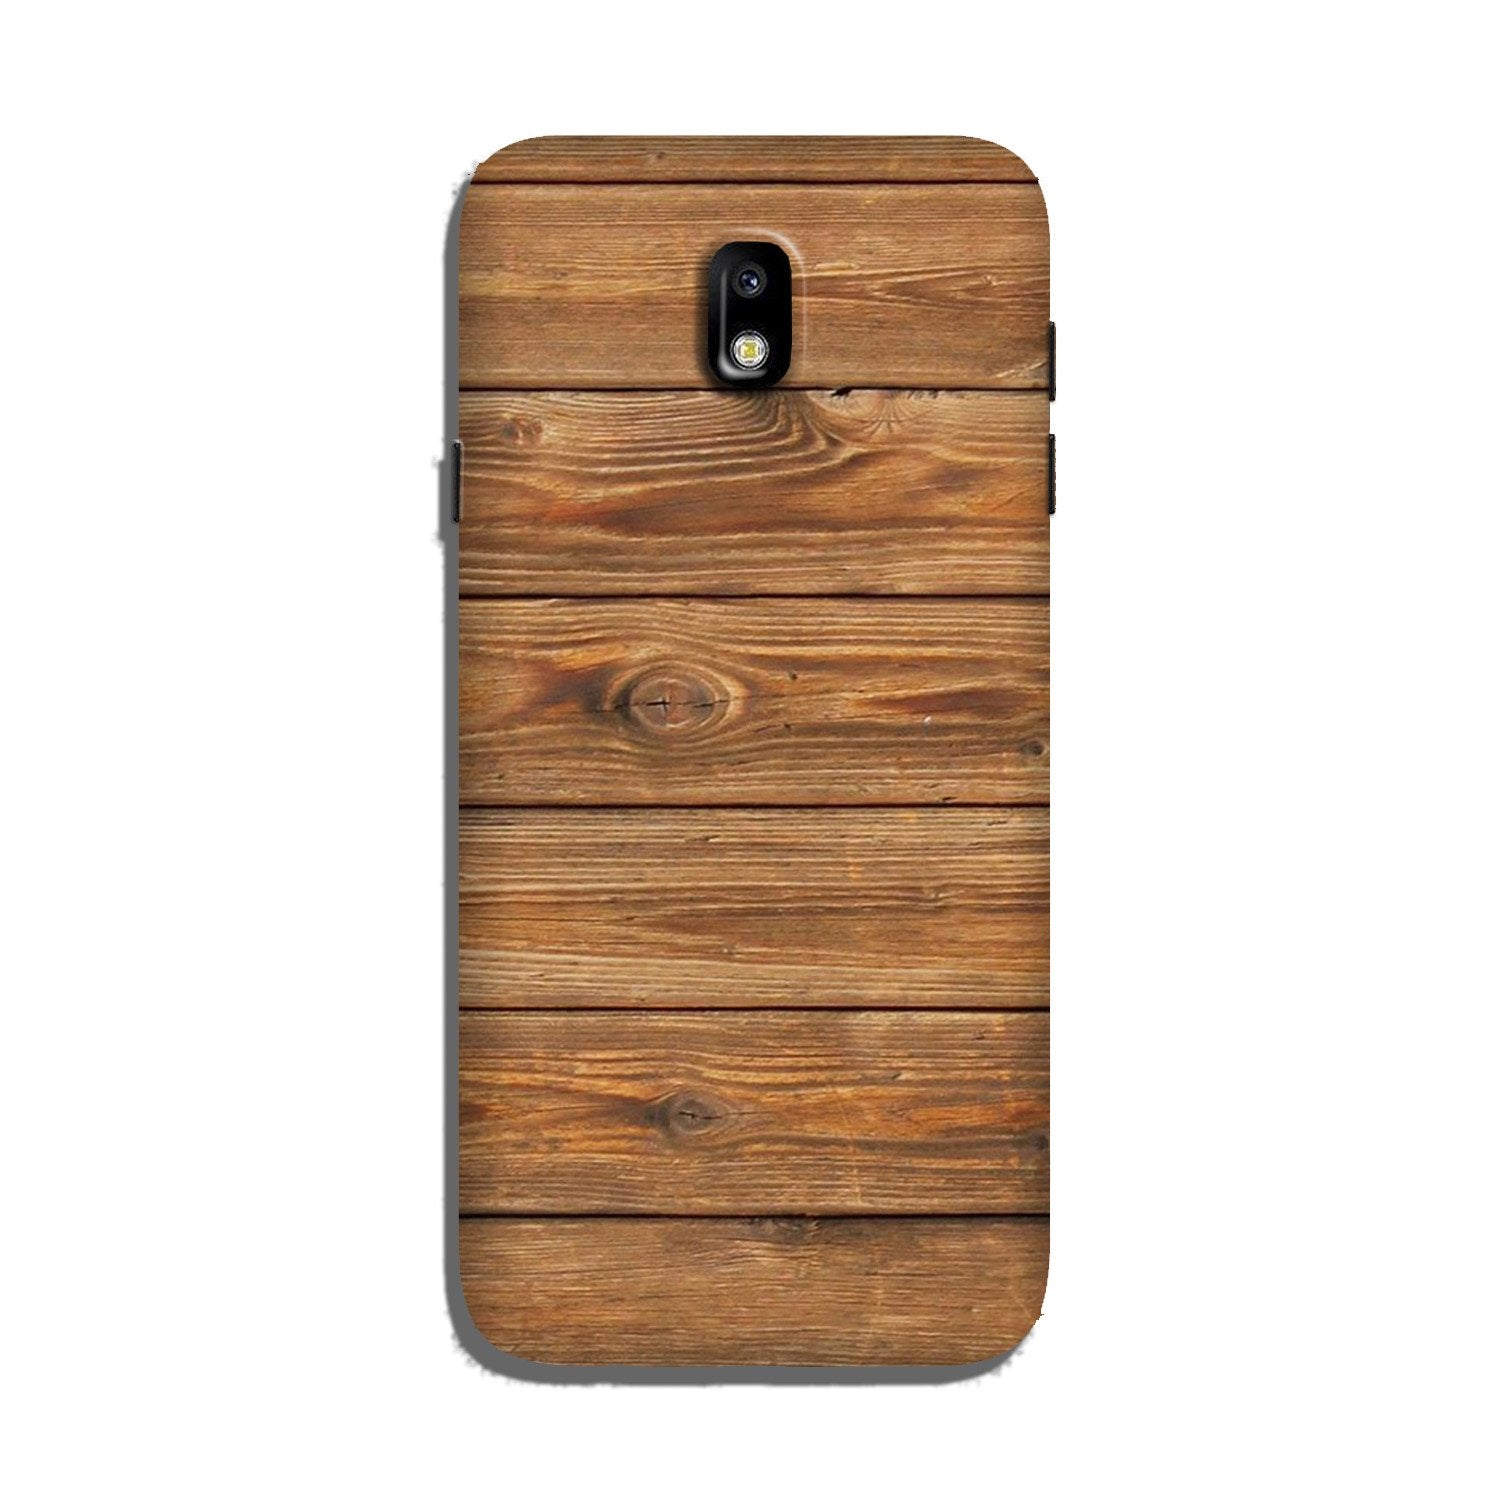 Wooden Look Case for Galaxy J3 Pro  (Design - 113)